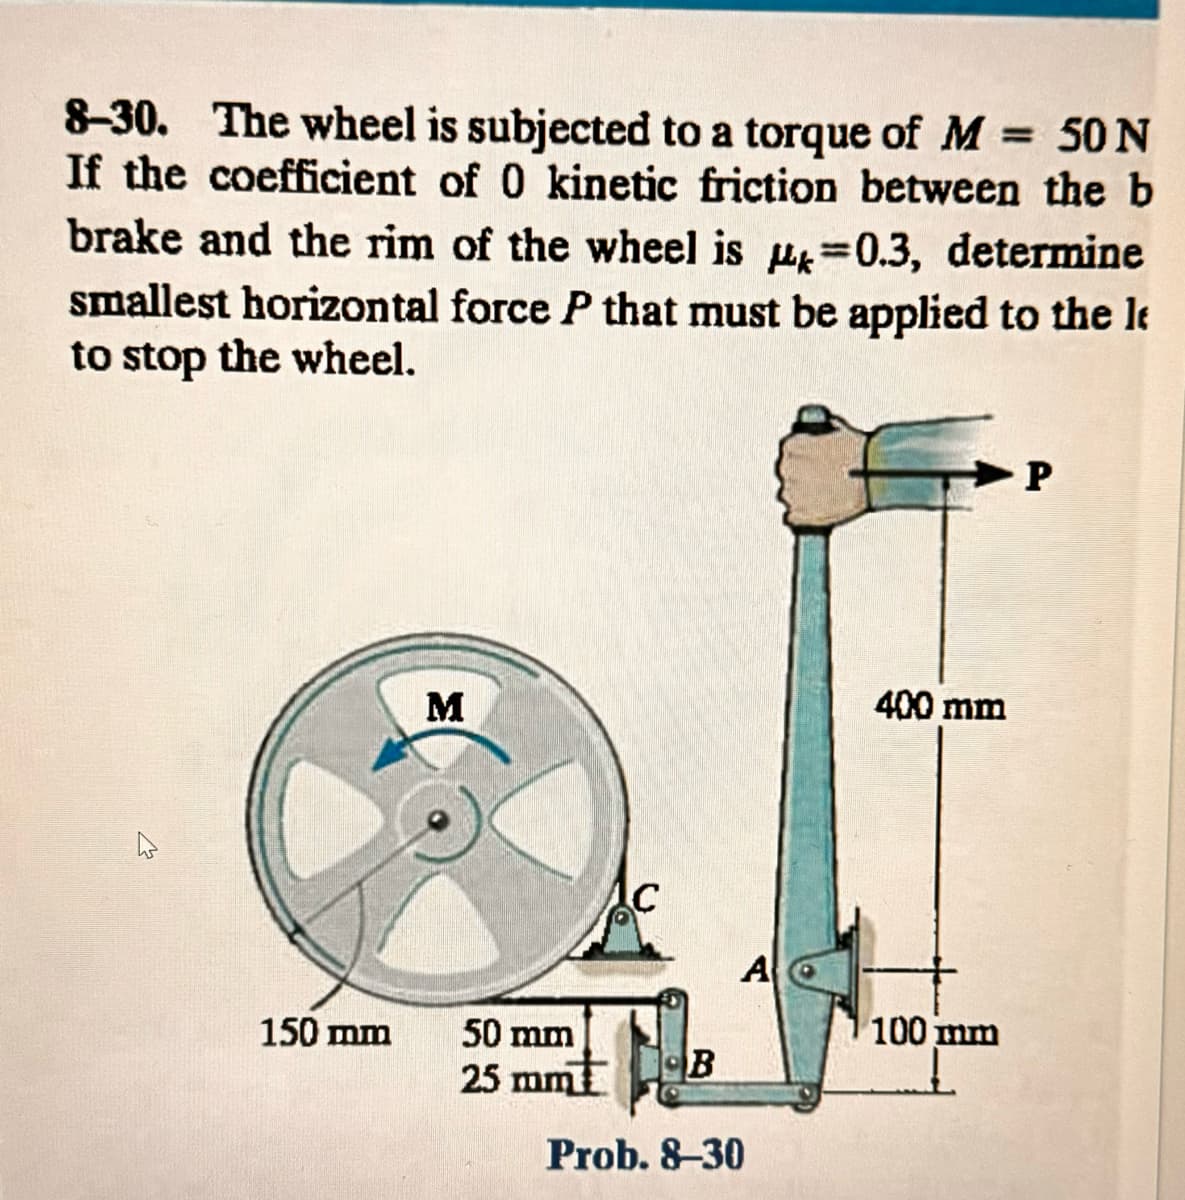 8-30. The wheel is subjected to a torque of M = 50 N
If the coefficient of 0 kinetic friction between the b
brake and the rim of the wheel is 0.3, determine
smallest horizontal force P that must be applied to the le
to stop the wheel.
150 mm
M
50 mm
25 mm
B
A
Prob. 8-30
=
400 mm
100 mm
P